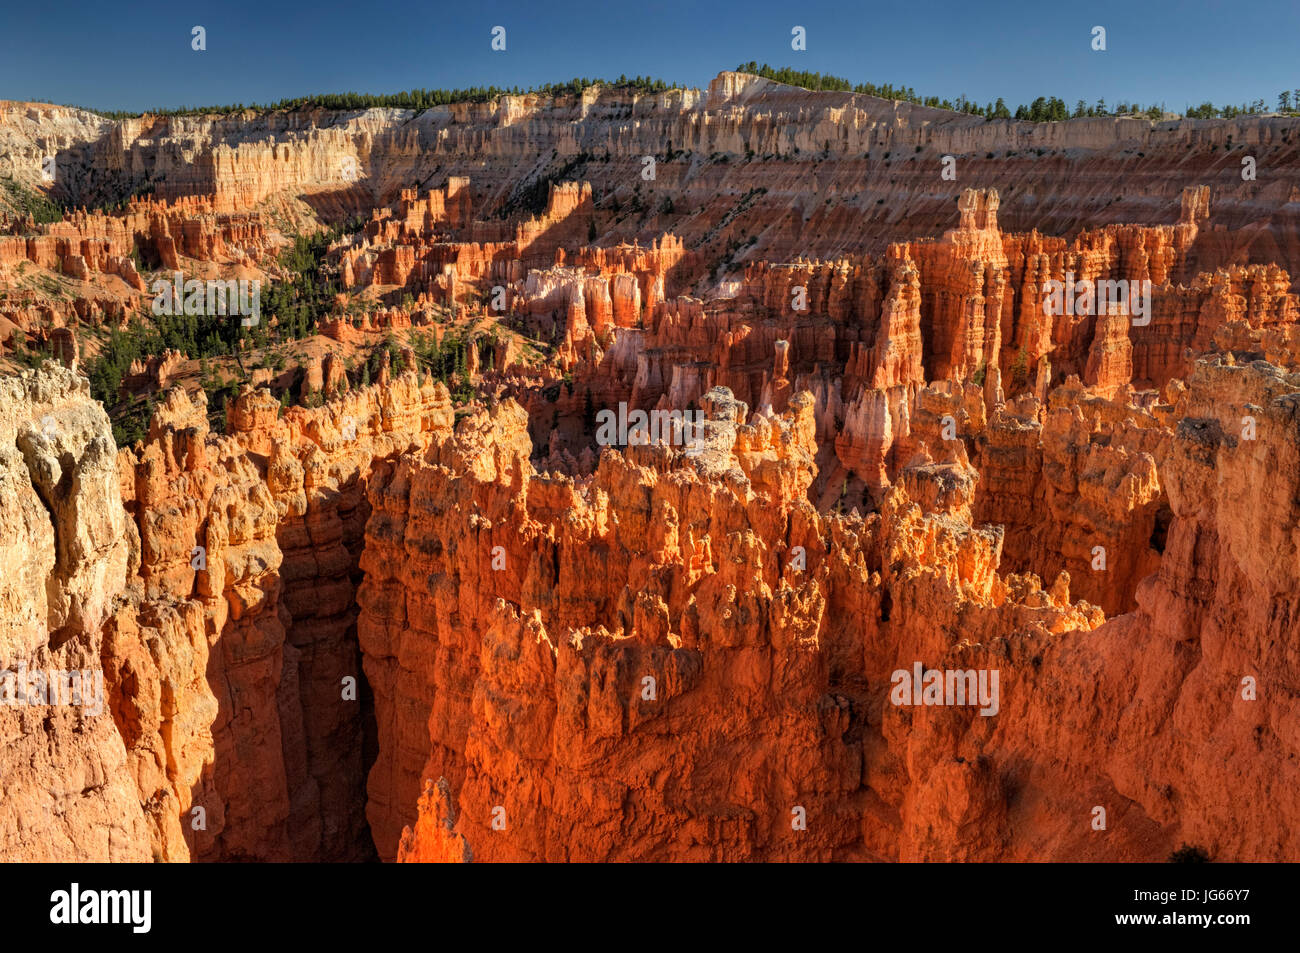 The view from Sunset Point at sunset, Bryce Canyon National Park, Utah Stock Photo